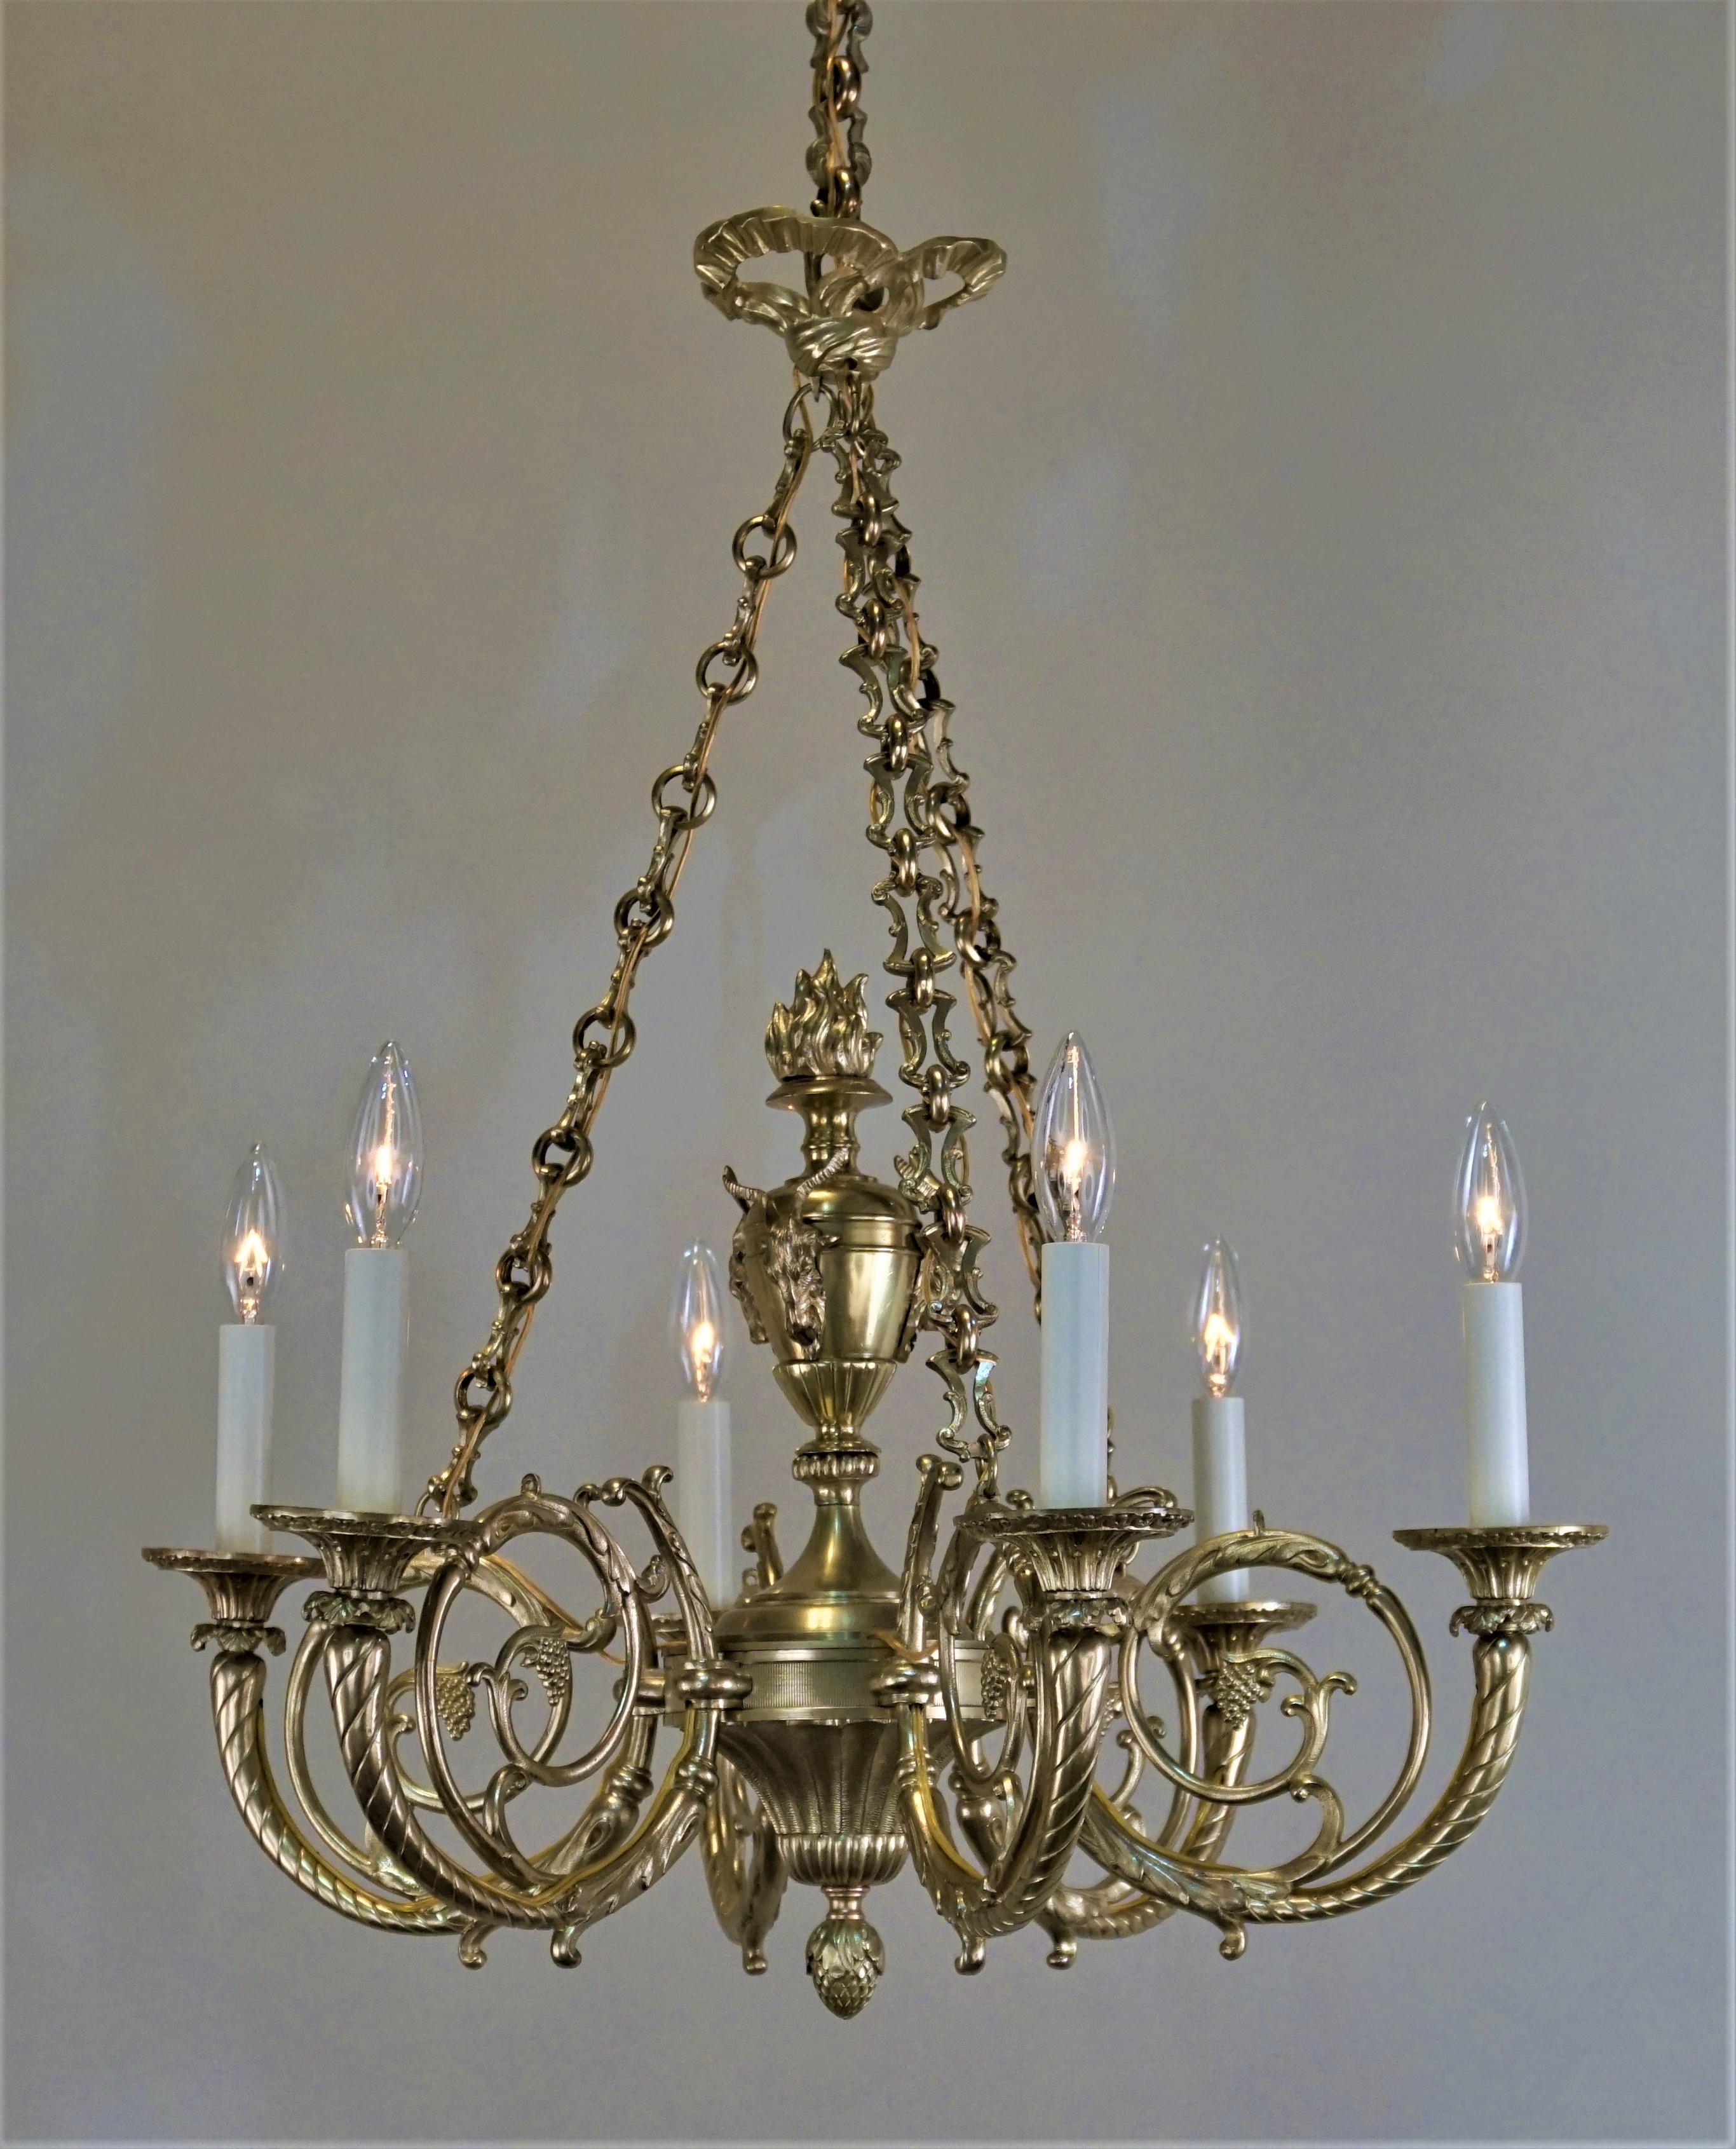 Elegant six-arm 1920s French bronze chandelier with goat heads center design.